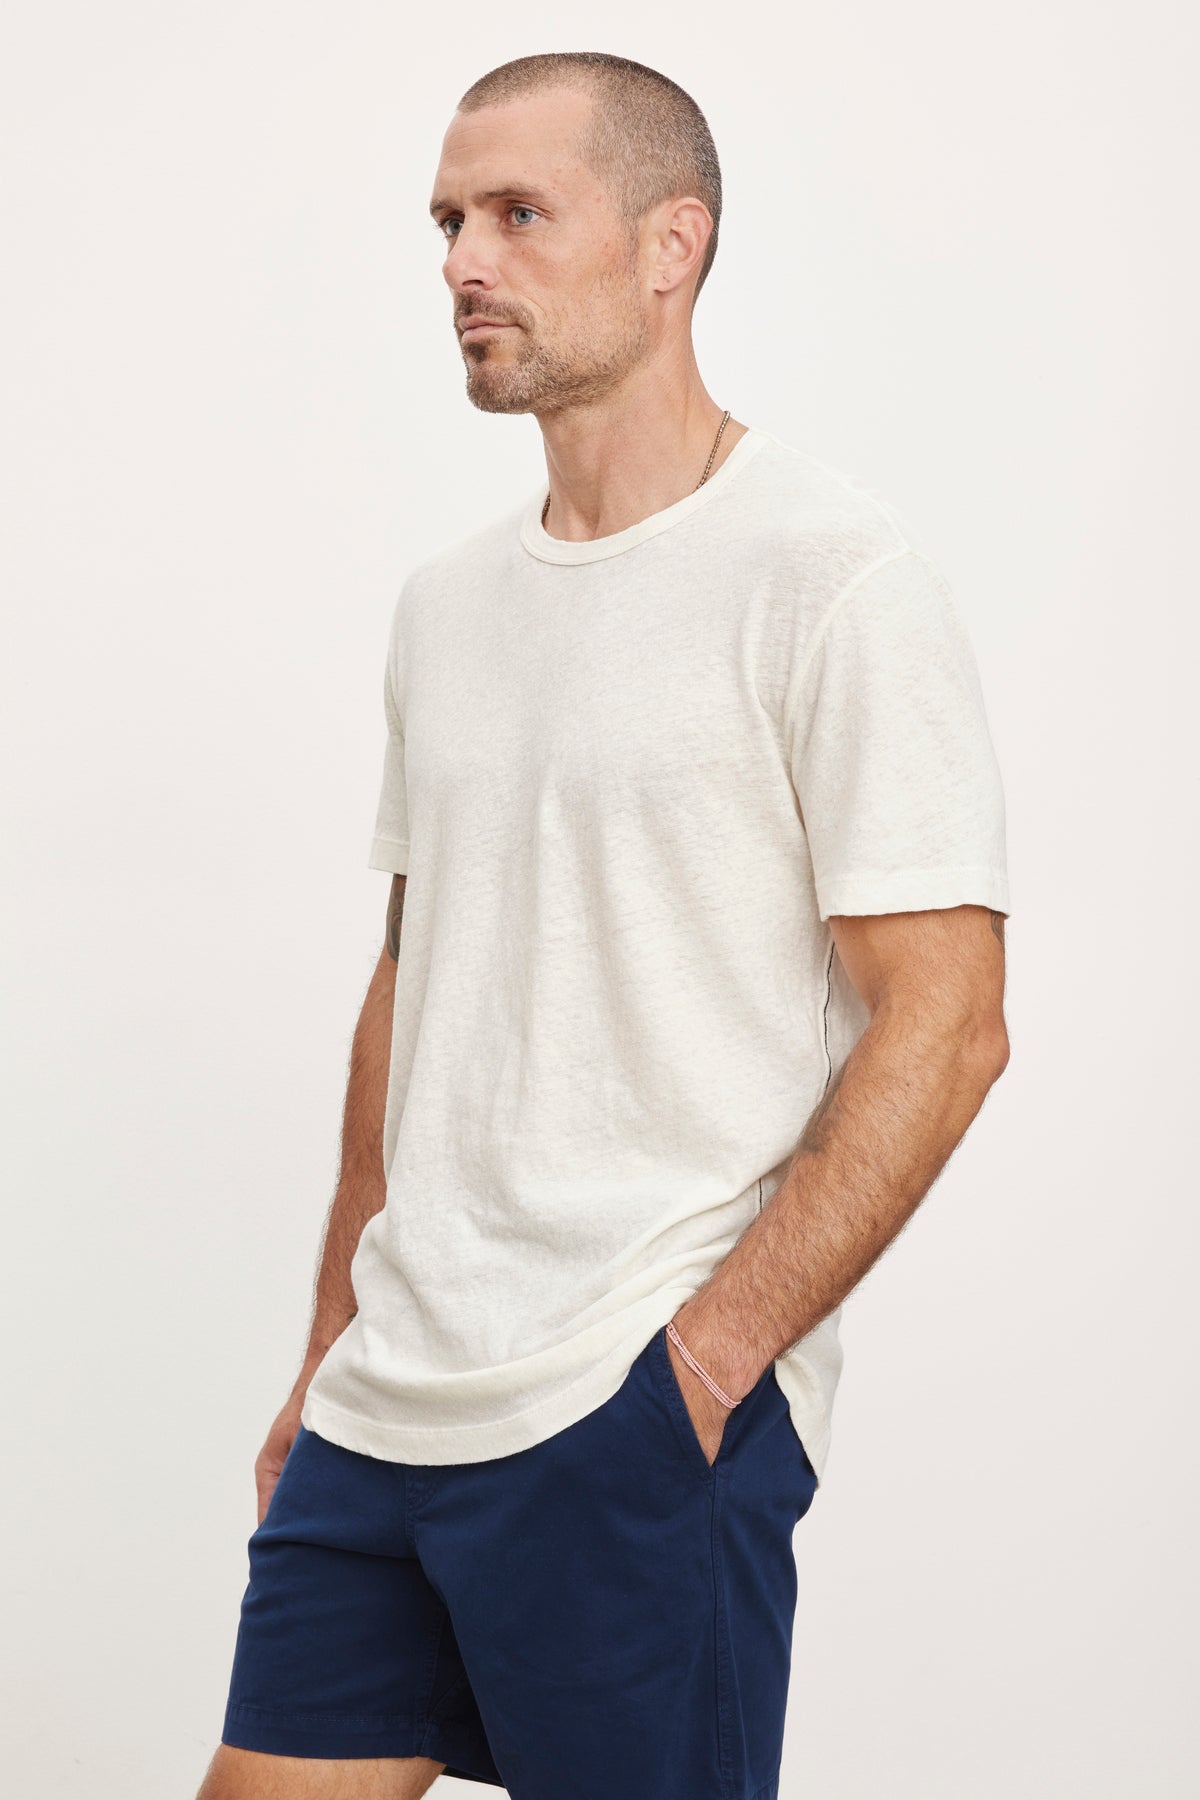 A man wearing a Velvet by Graham & Spencer Davey Tee and navy blue shorts, standing in profile against a white background.-36732521283777